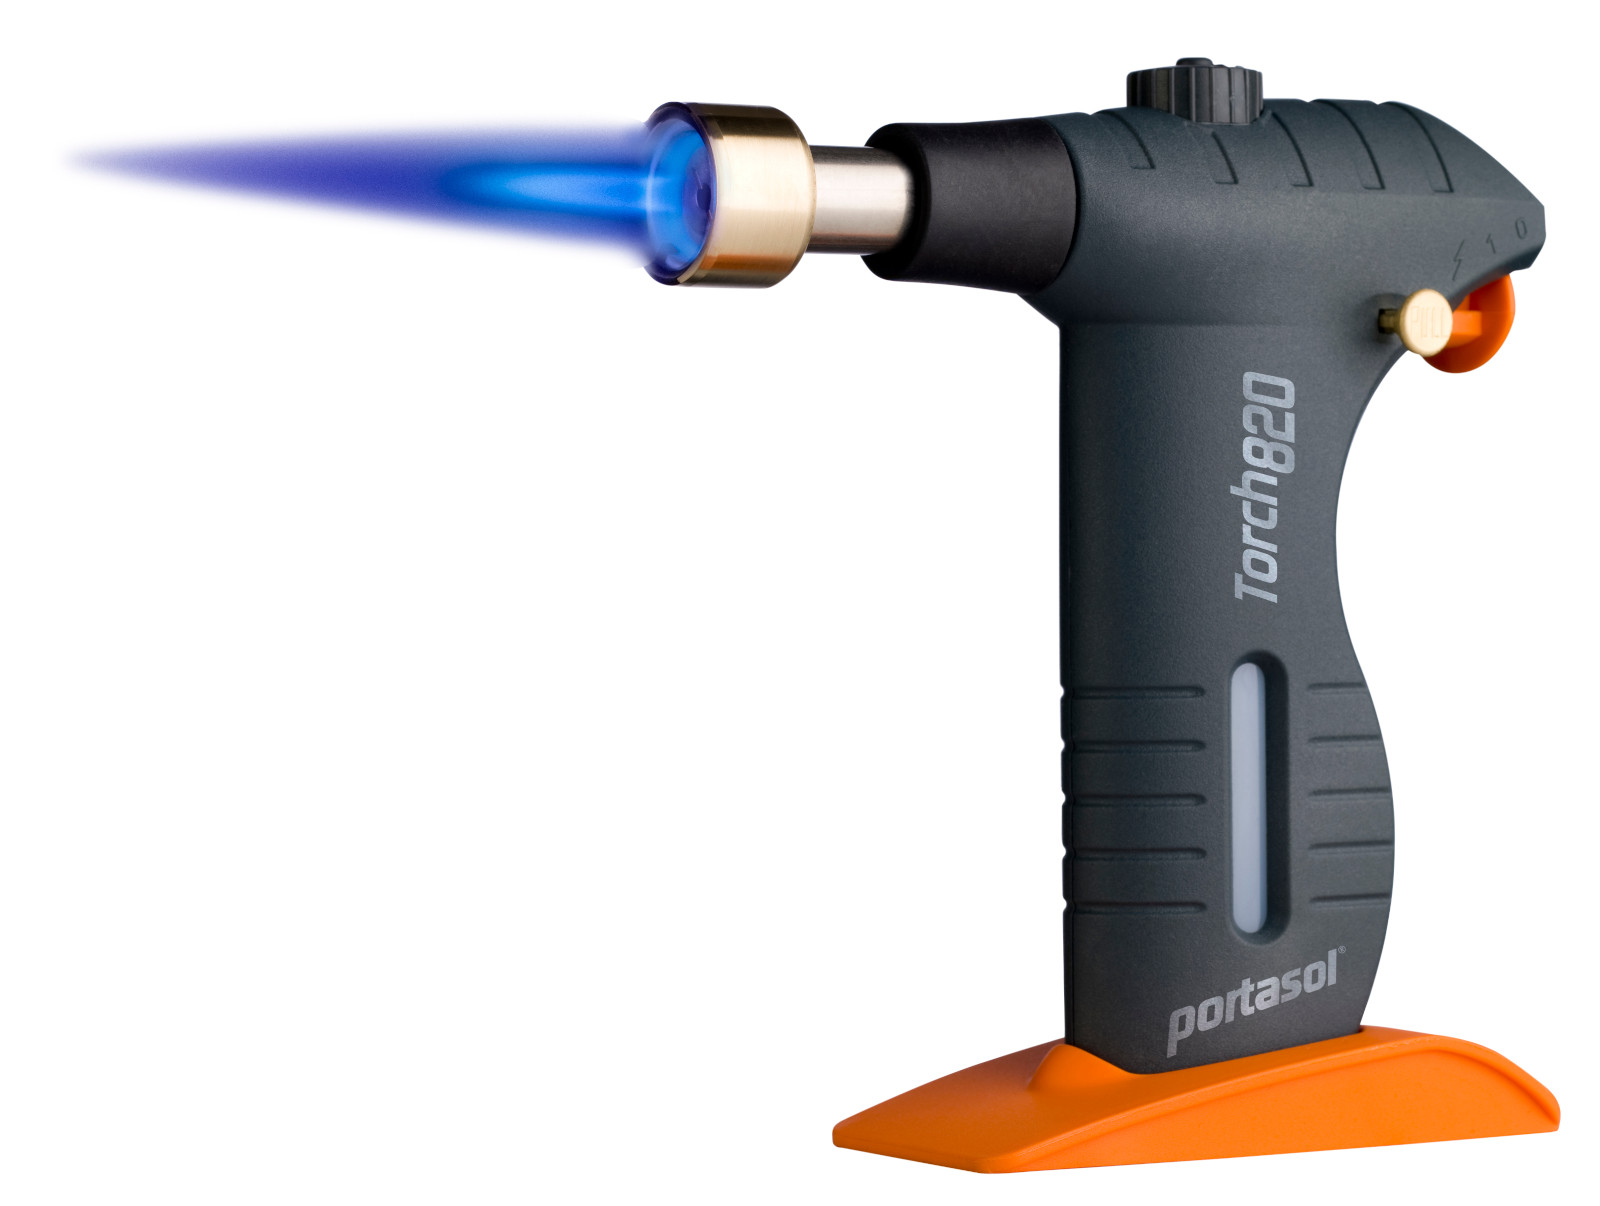 The Many Uses of Butane Torches : Exploring the Portasol GT220 and HP820